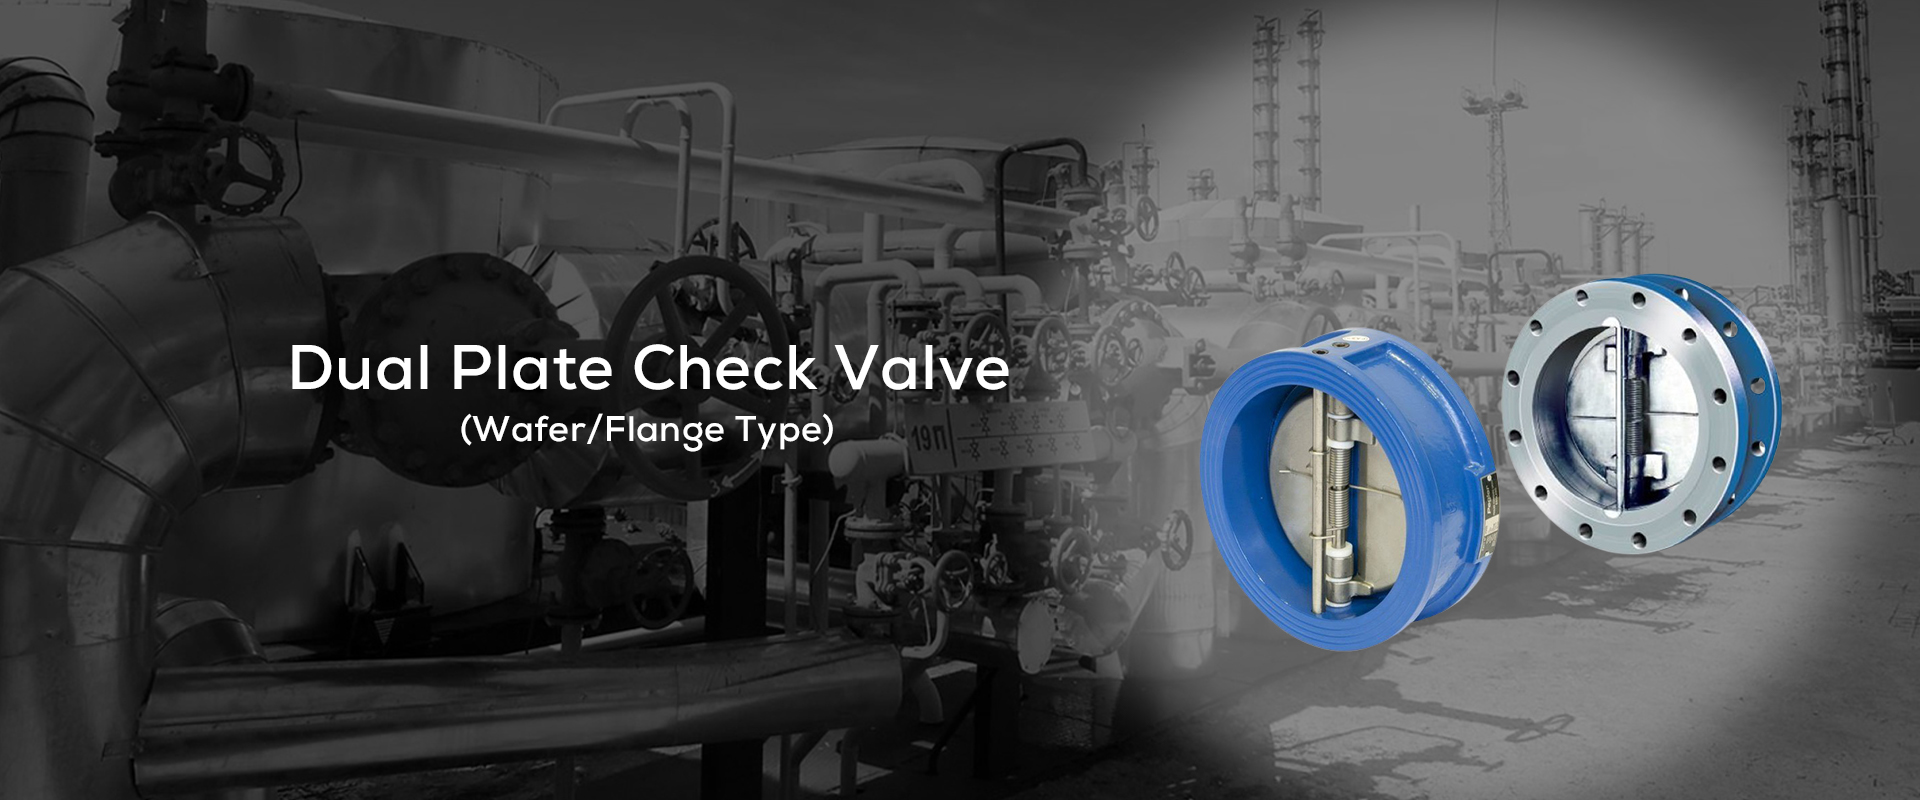 Industrial Valves Manufacturer , The quality valves for Oil, Gas and Water